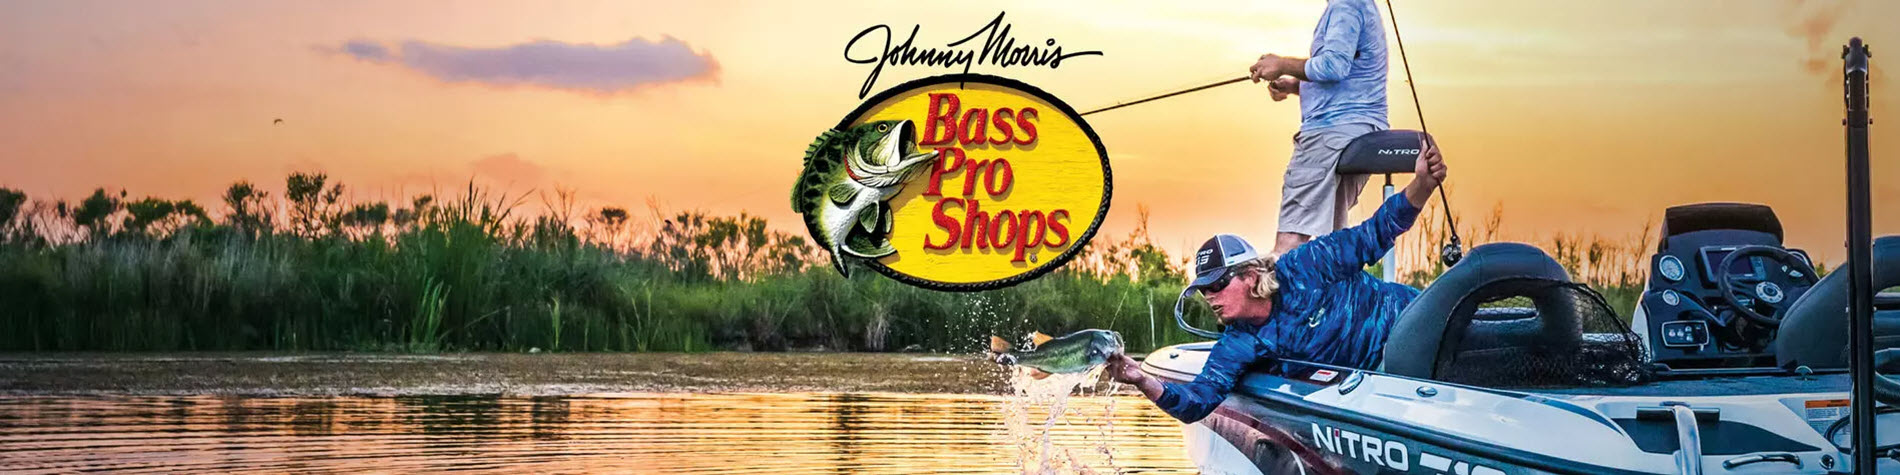 Bass Pro Shops Page Header